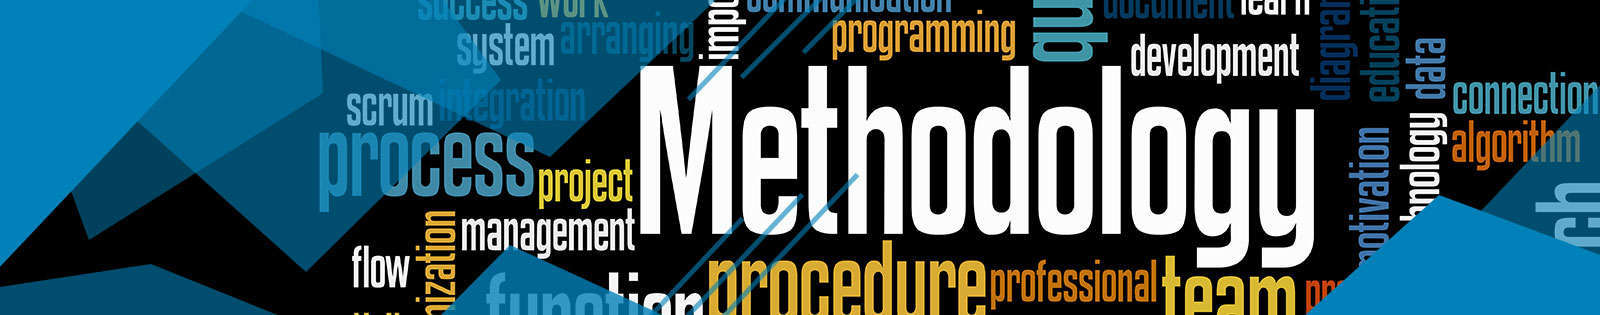 about methodology